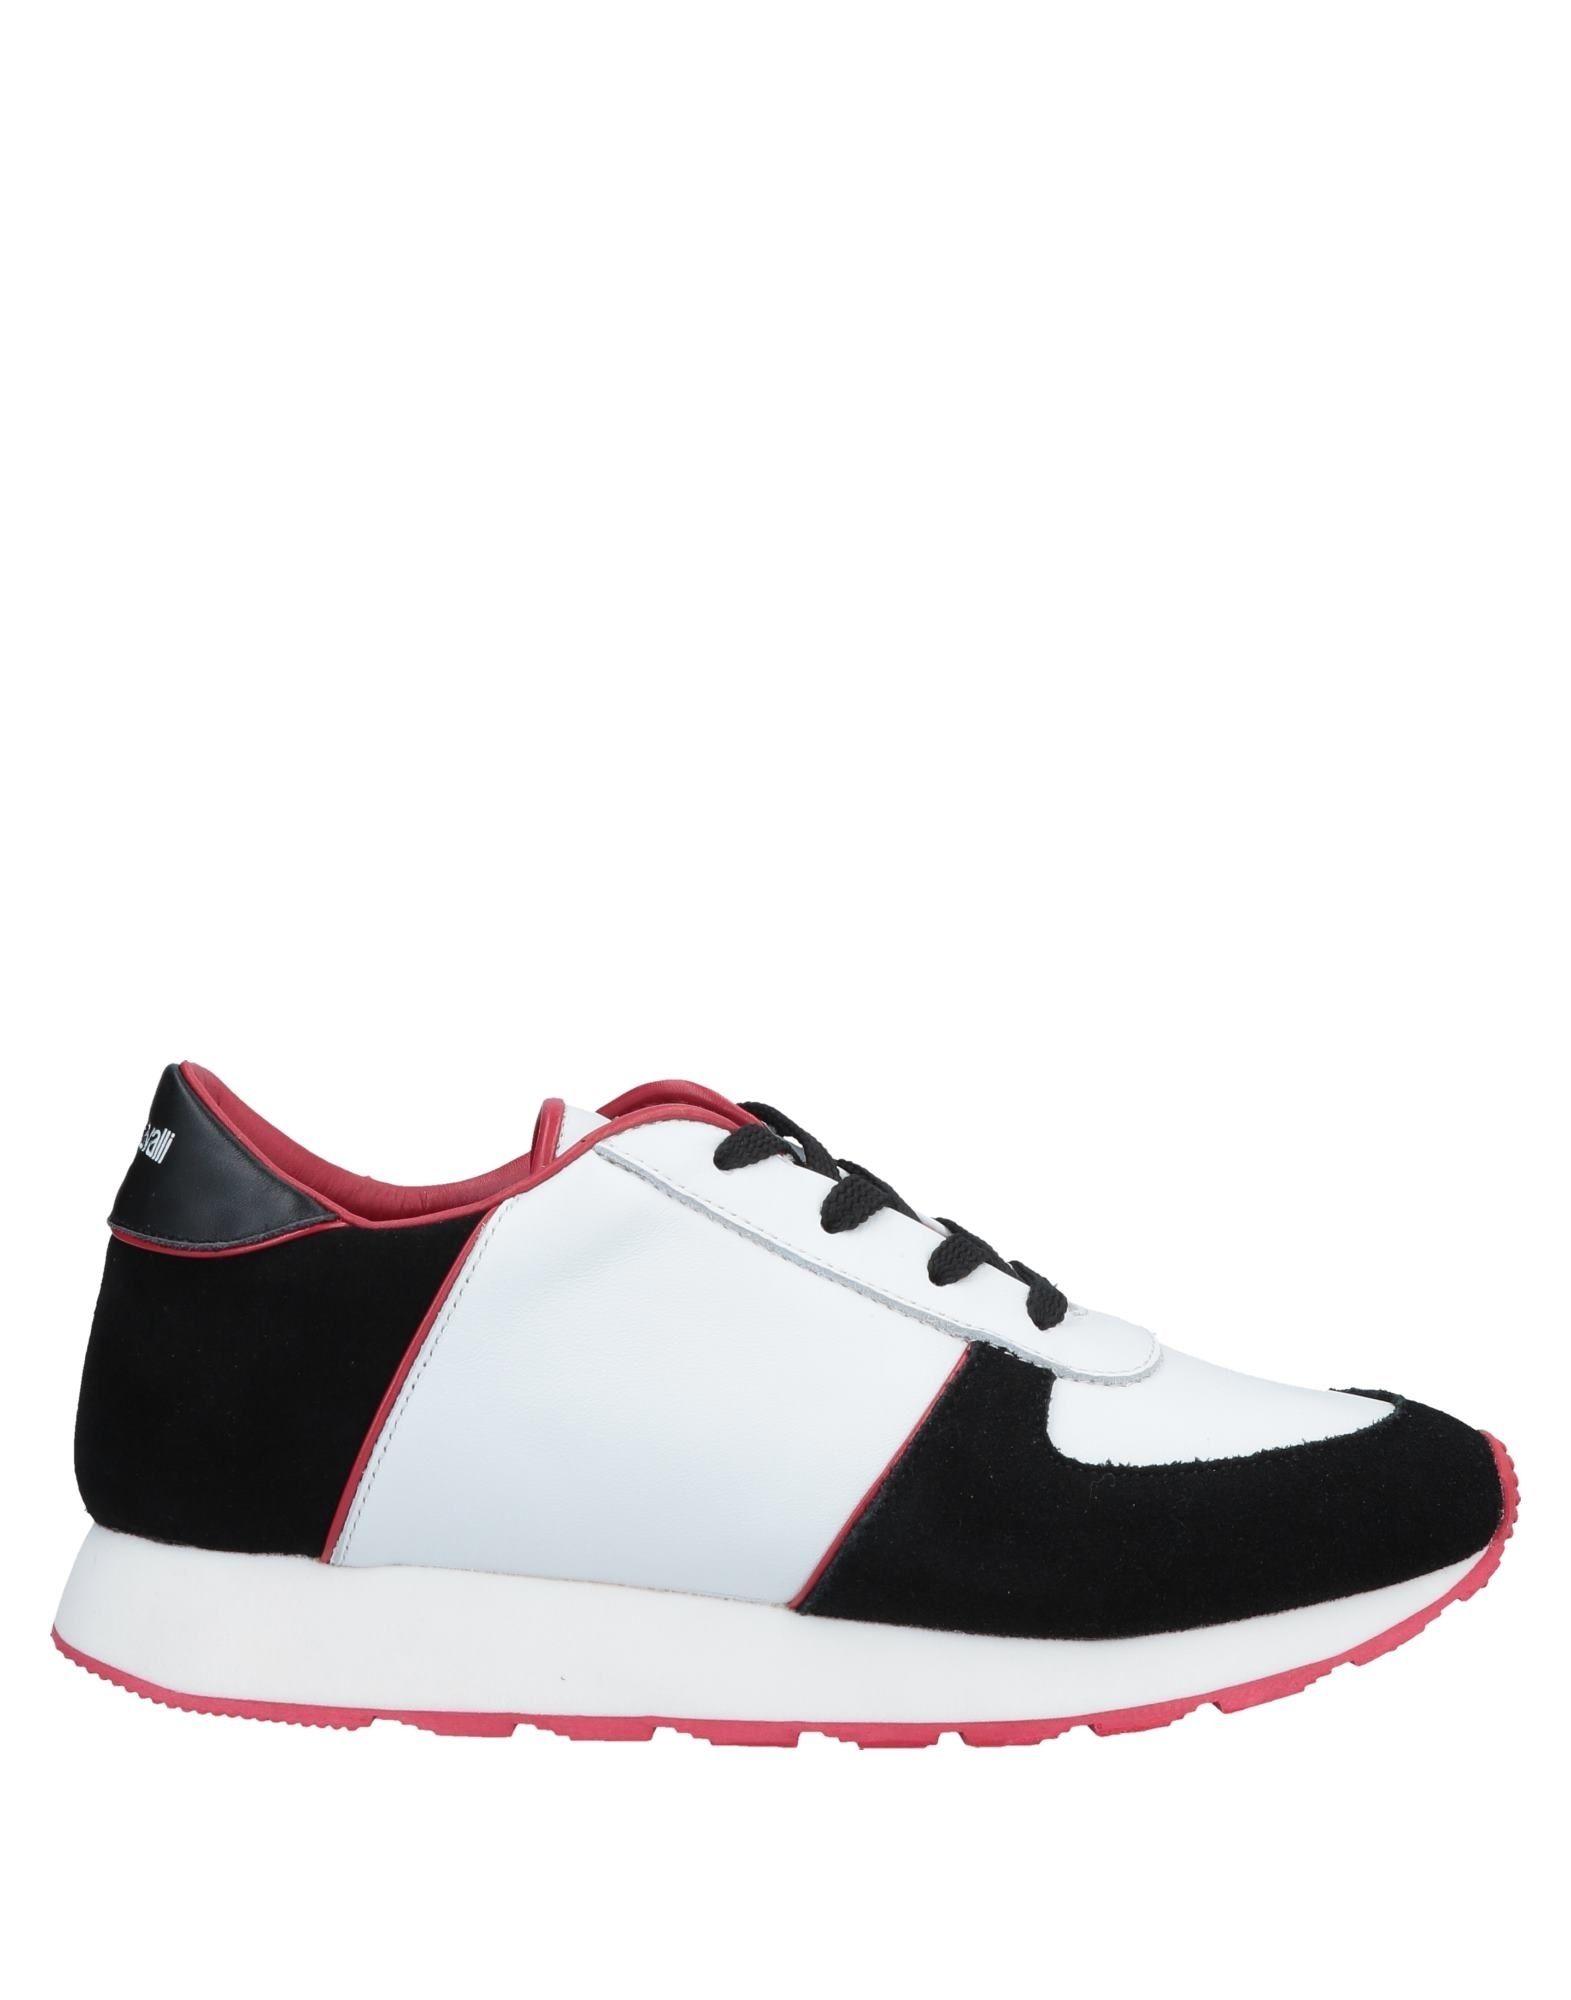 Roberto Cavalli Leather Low-tops & Sneakers in White for Men - Lyst